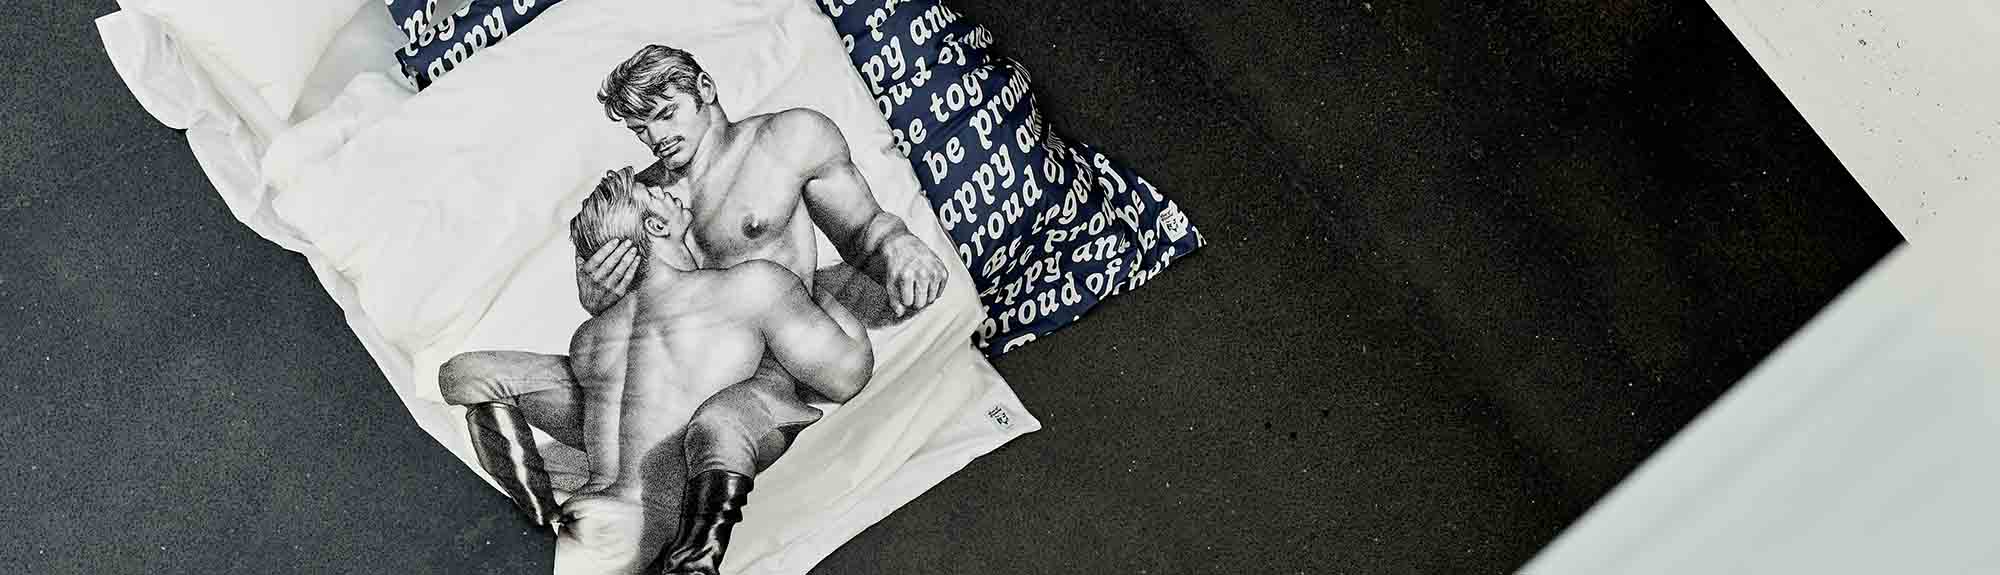 Finlayson Tom of Finland duvet covers